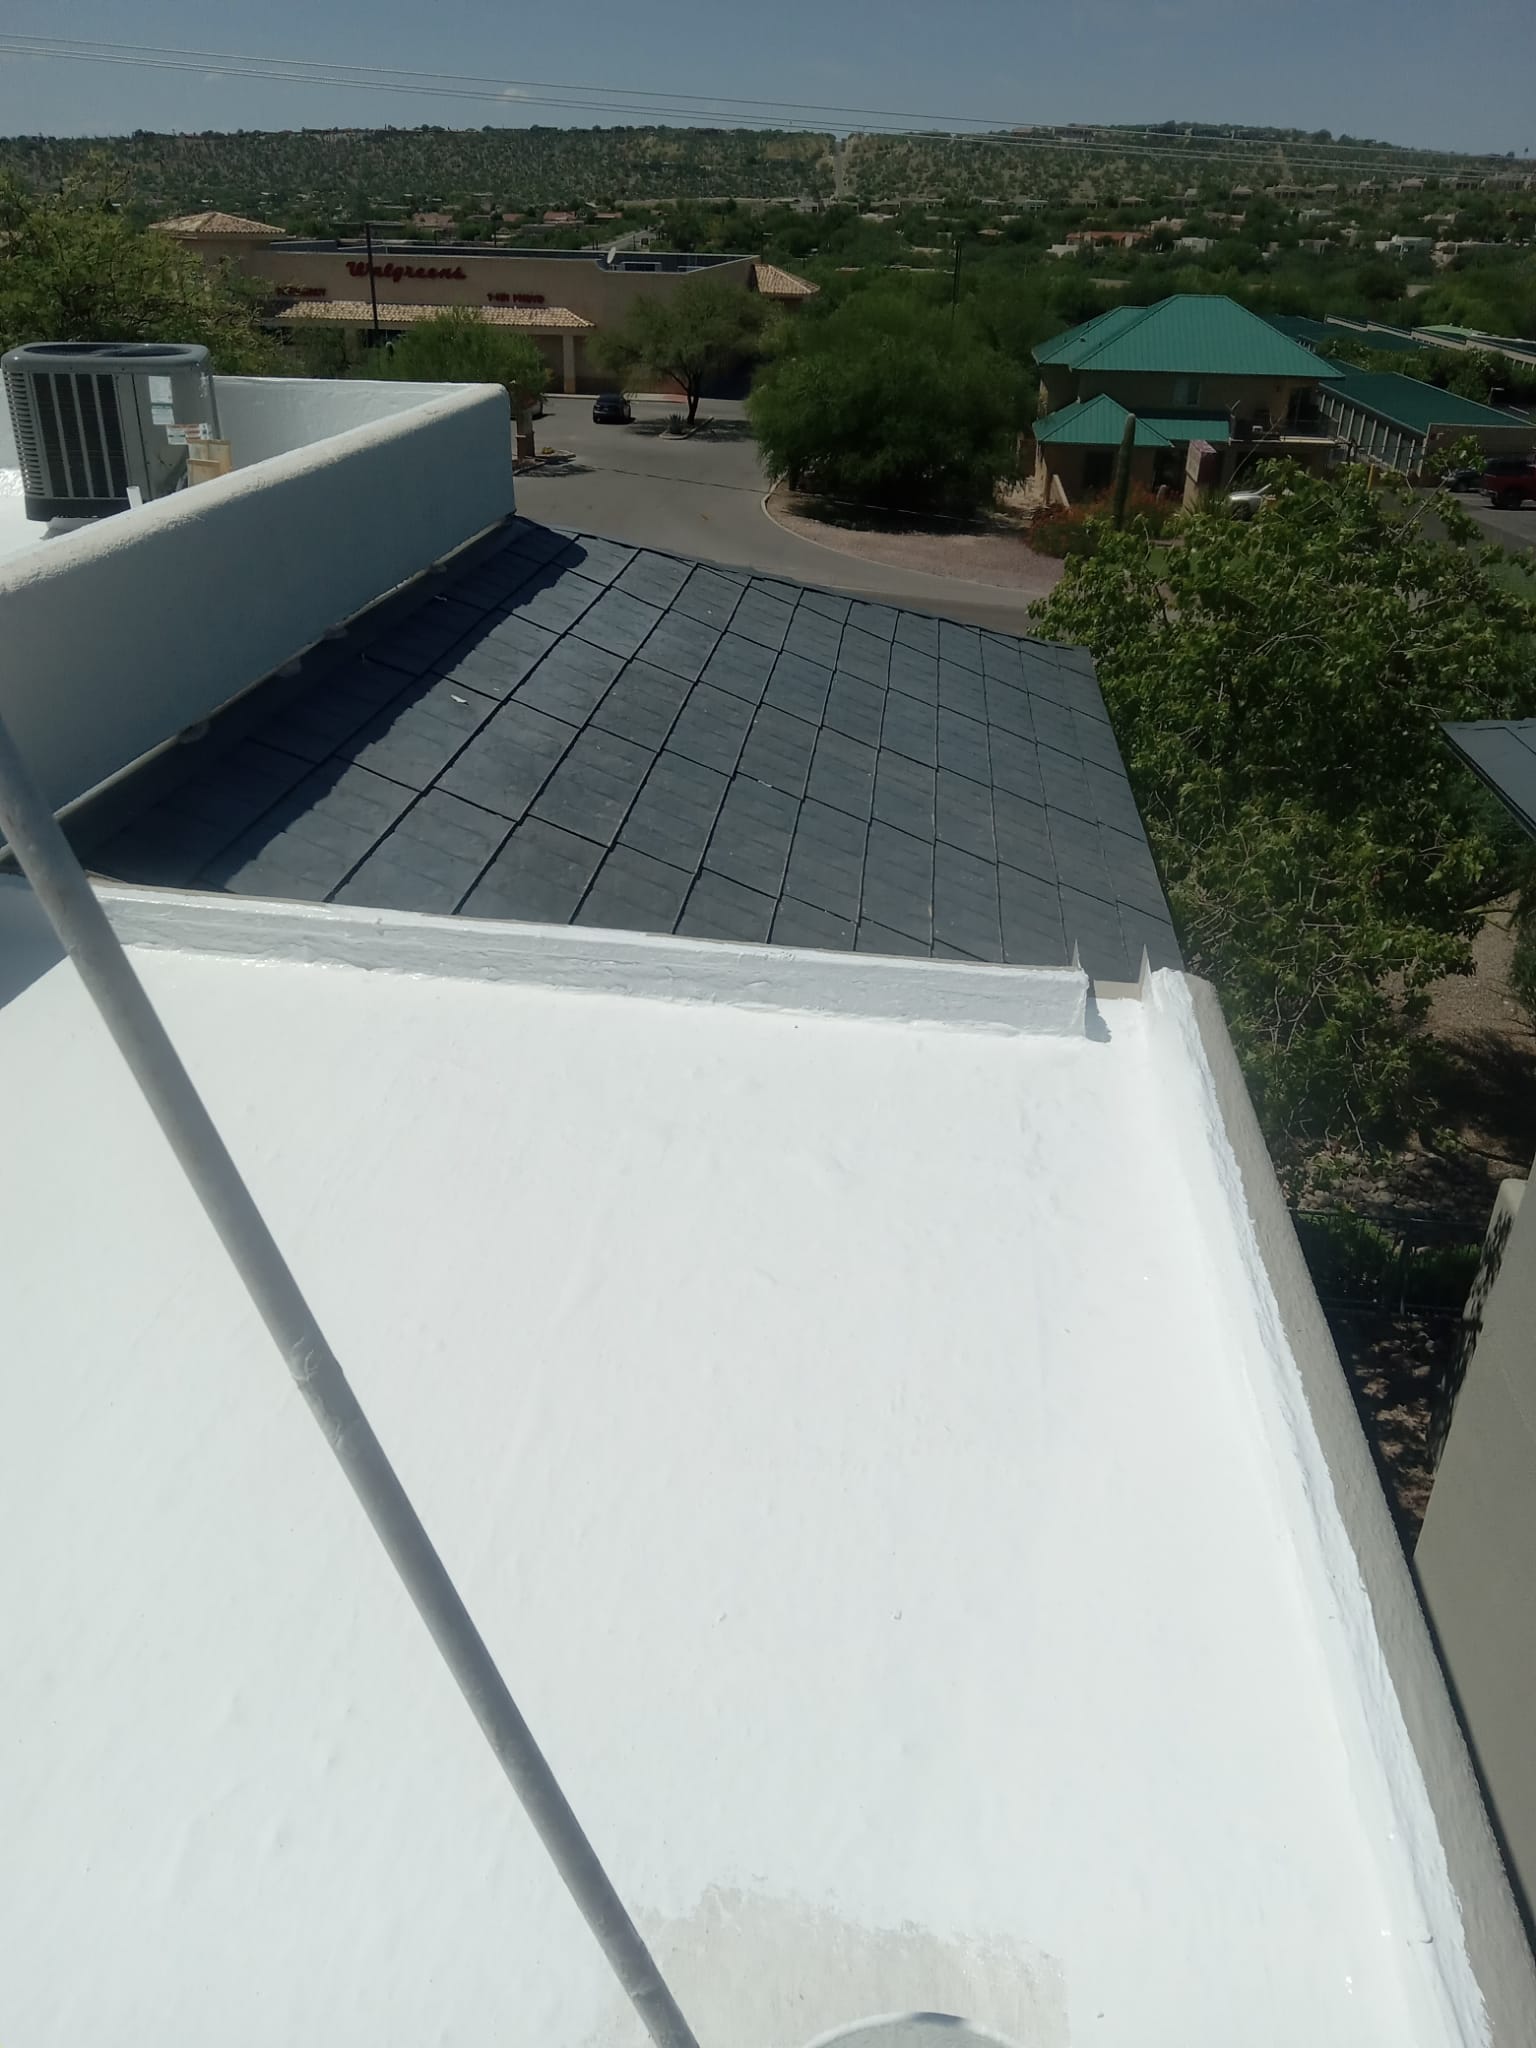 Pristine white spray foam coating on a residential rooftop in McCormick Ranch, reflecting the bright Arizona sun.